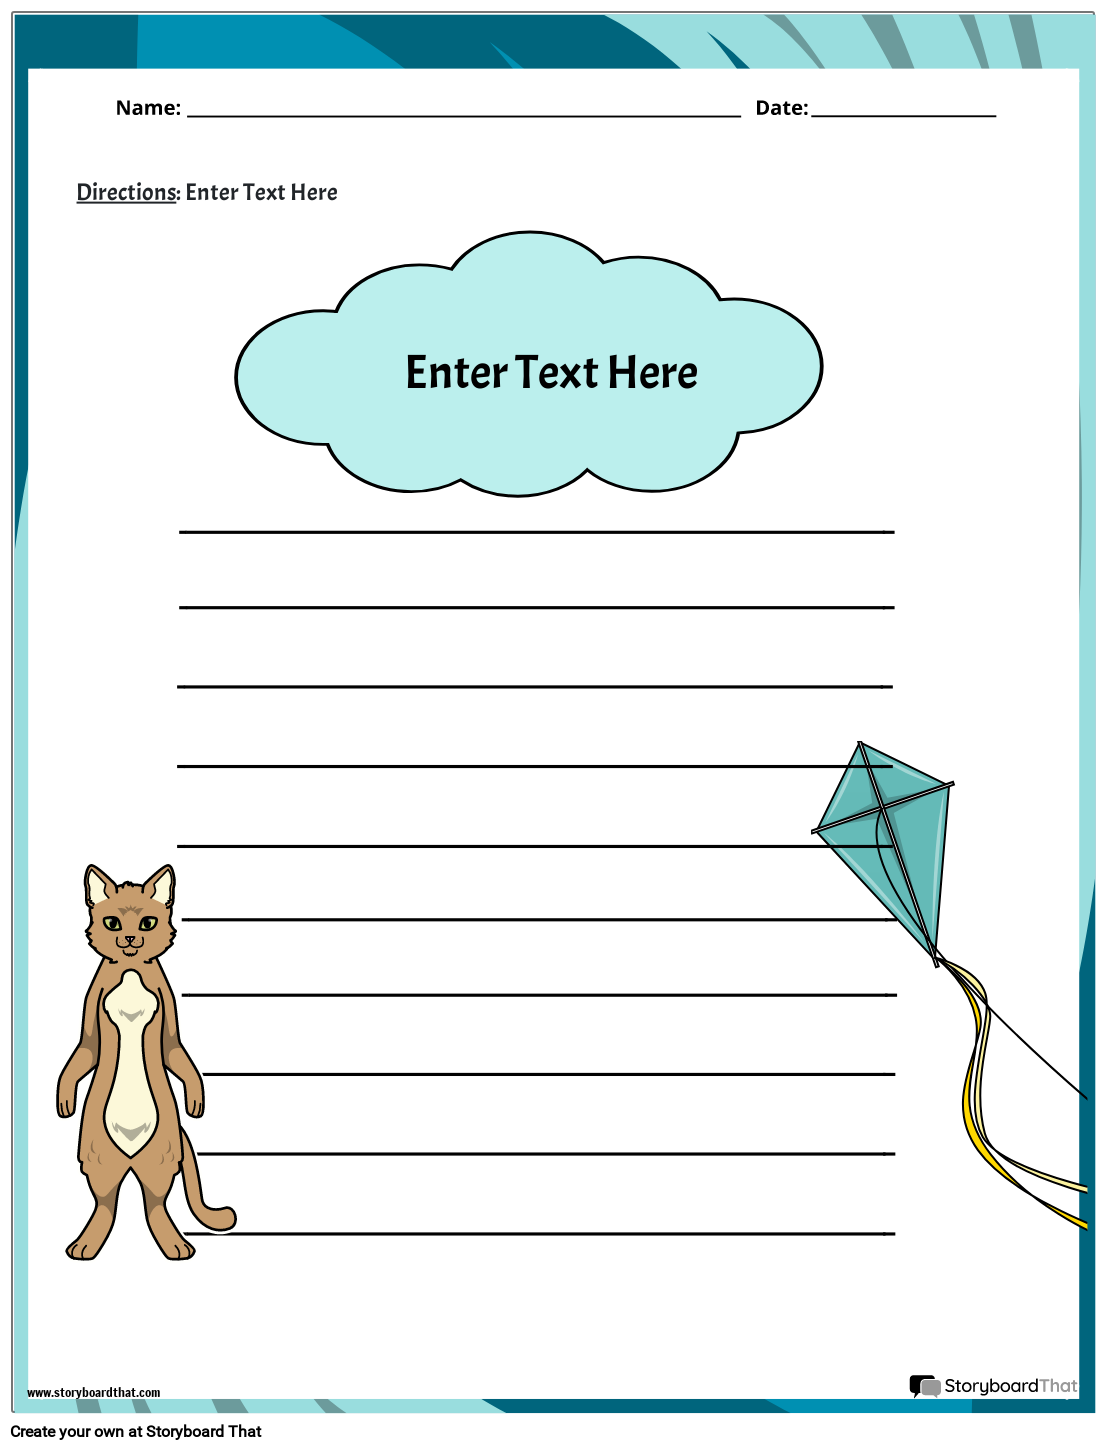 Poetry Worksheet Template Featuring a Blue Kite